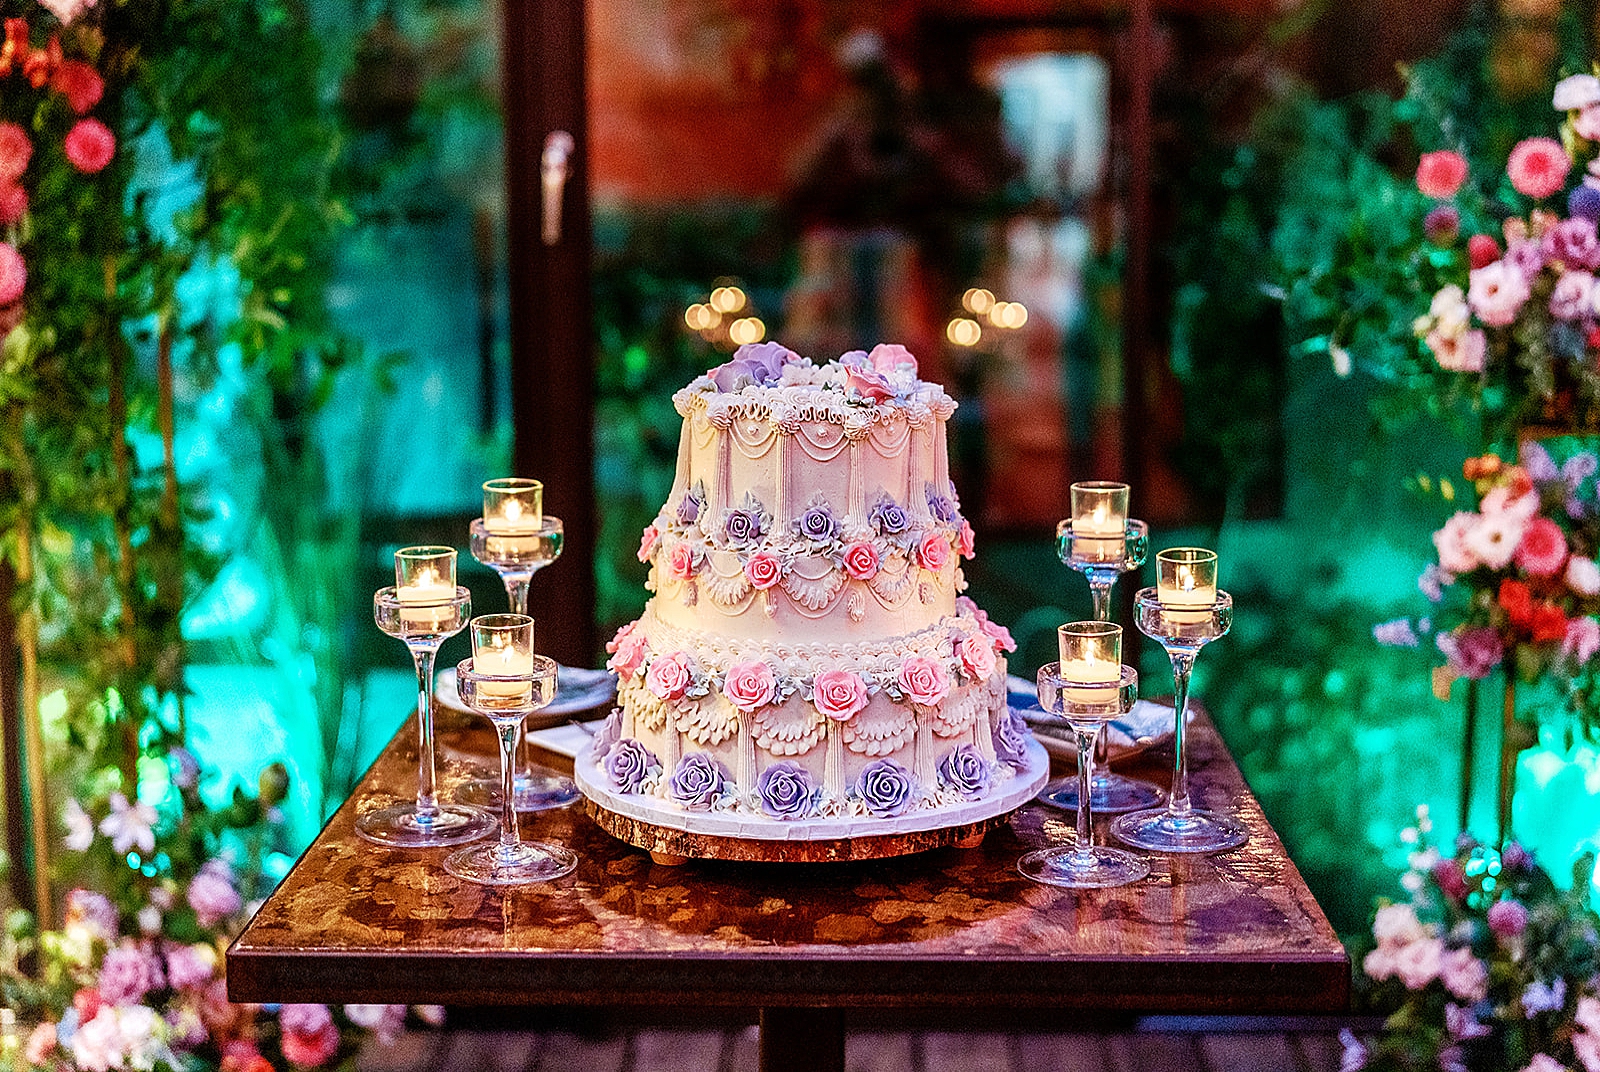 Full shot of the white, pink and purple wedding cake being presented on a table.